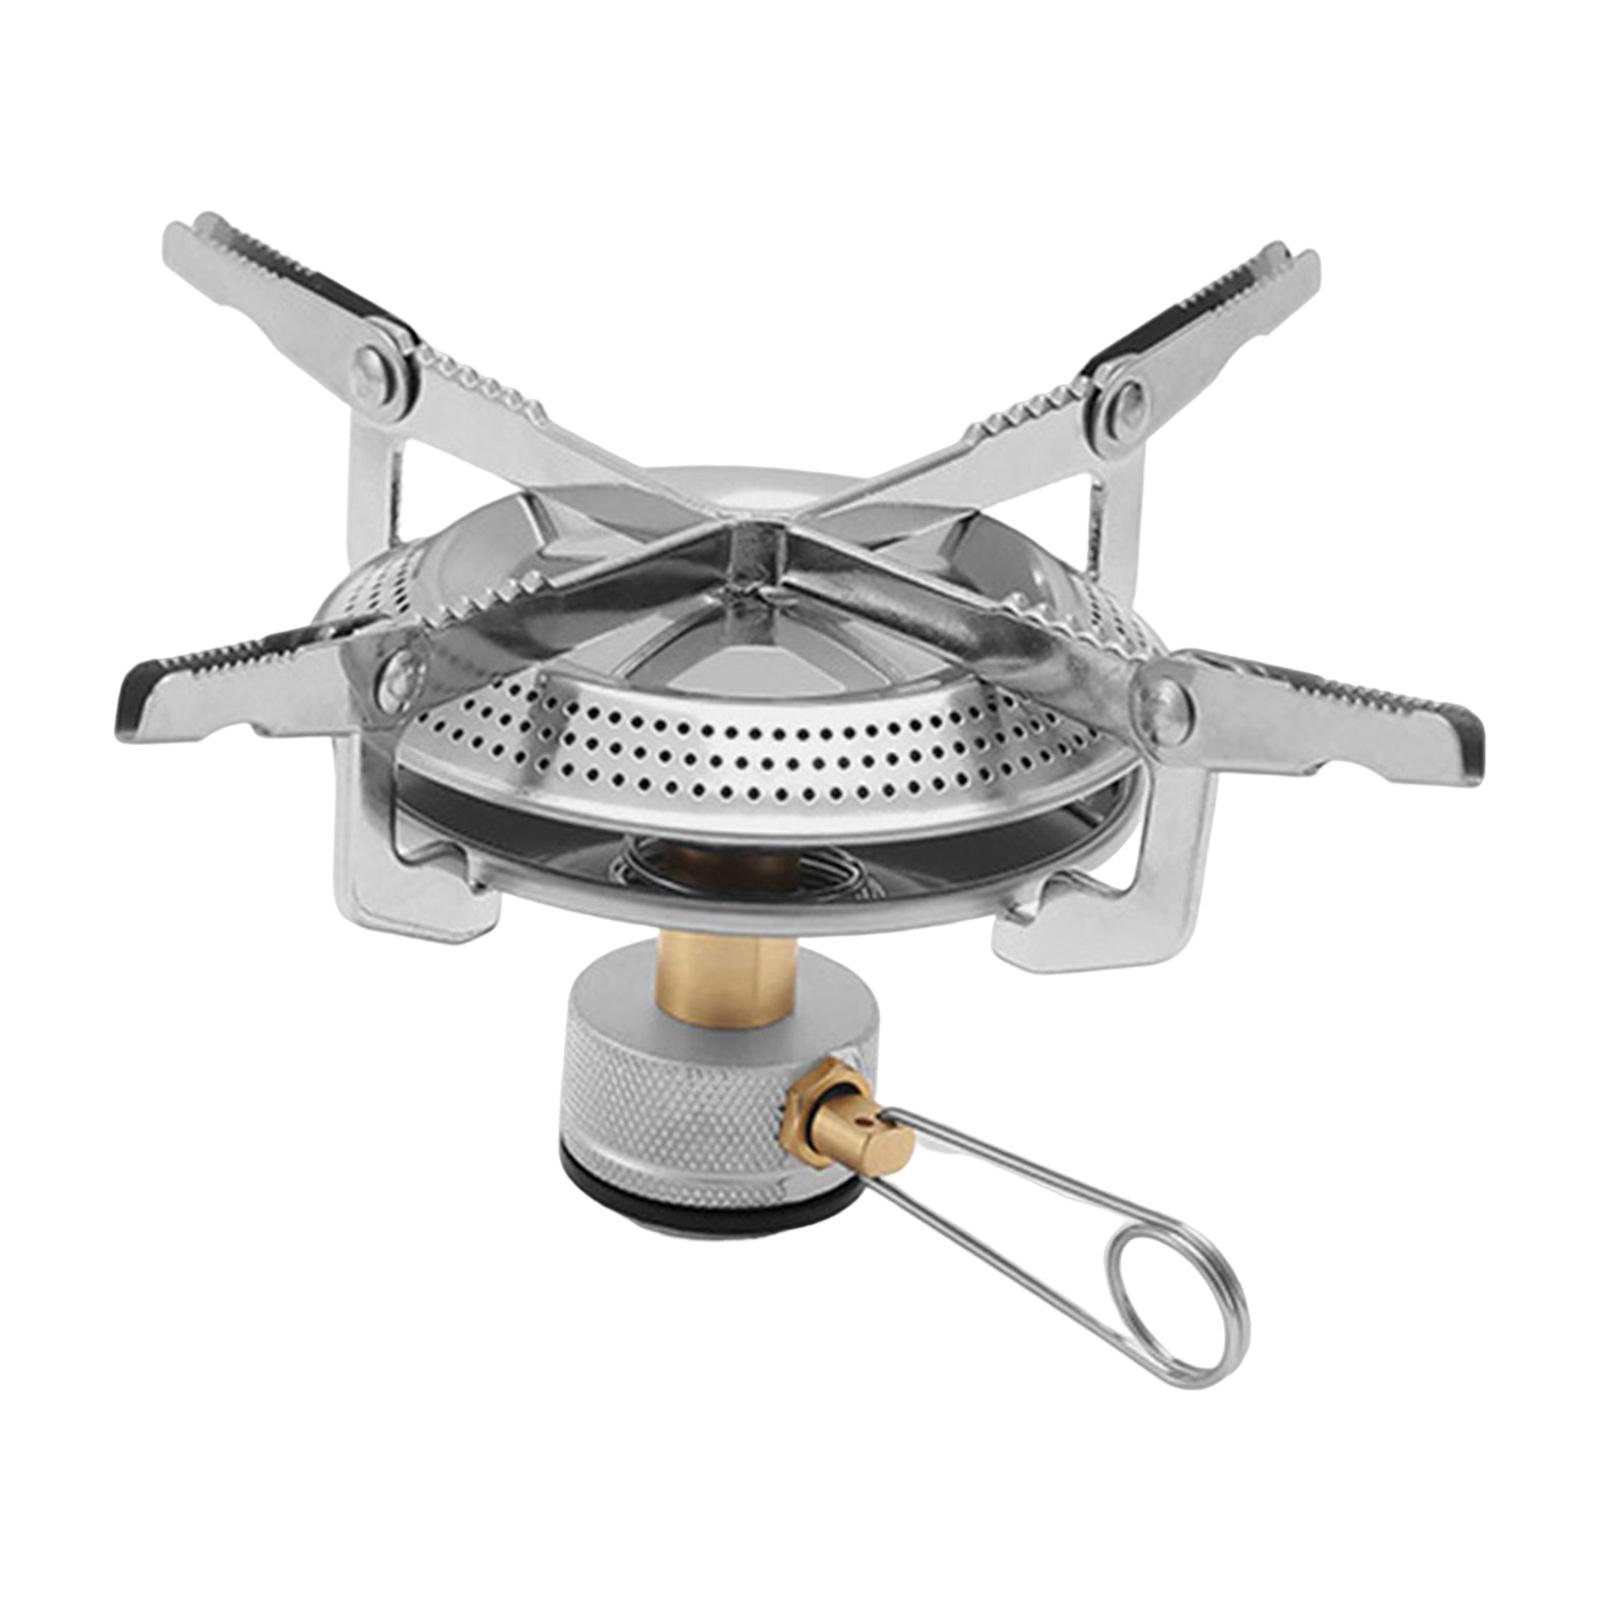 Portable Camping Gas Stove Outdoor Stove Burner Adjustable Valve for Cooking